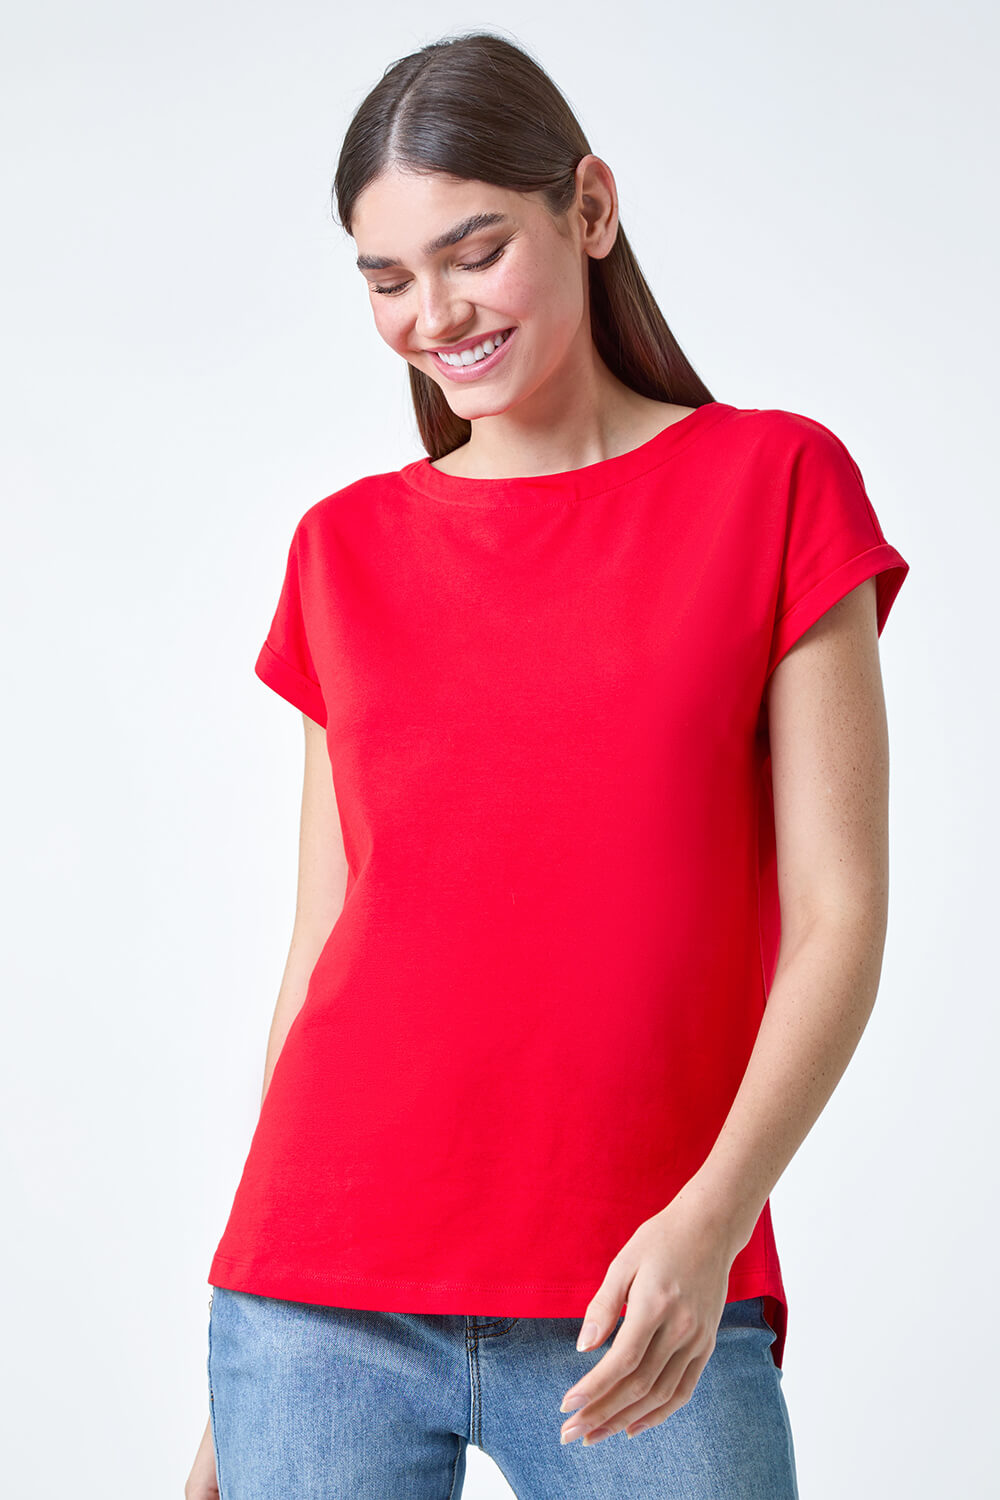 Red Plain Stretch Cotton Jersey T-Shirt, Image 4 of 5